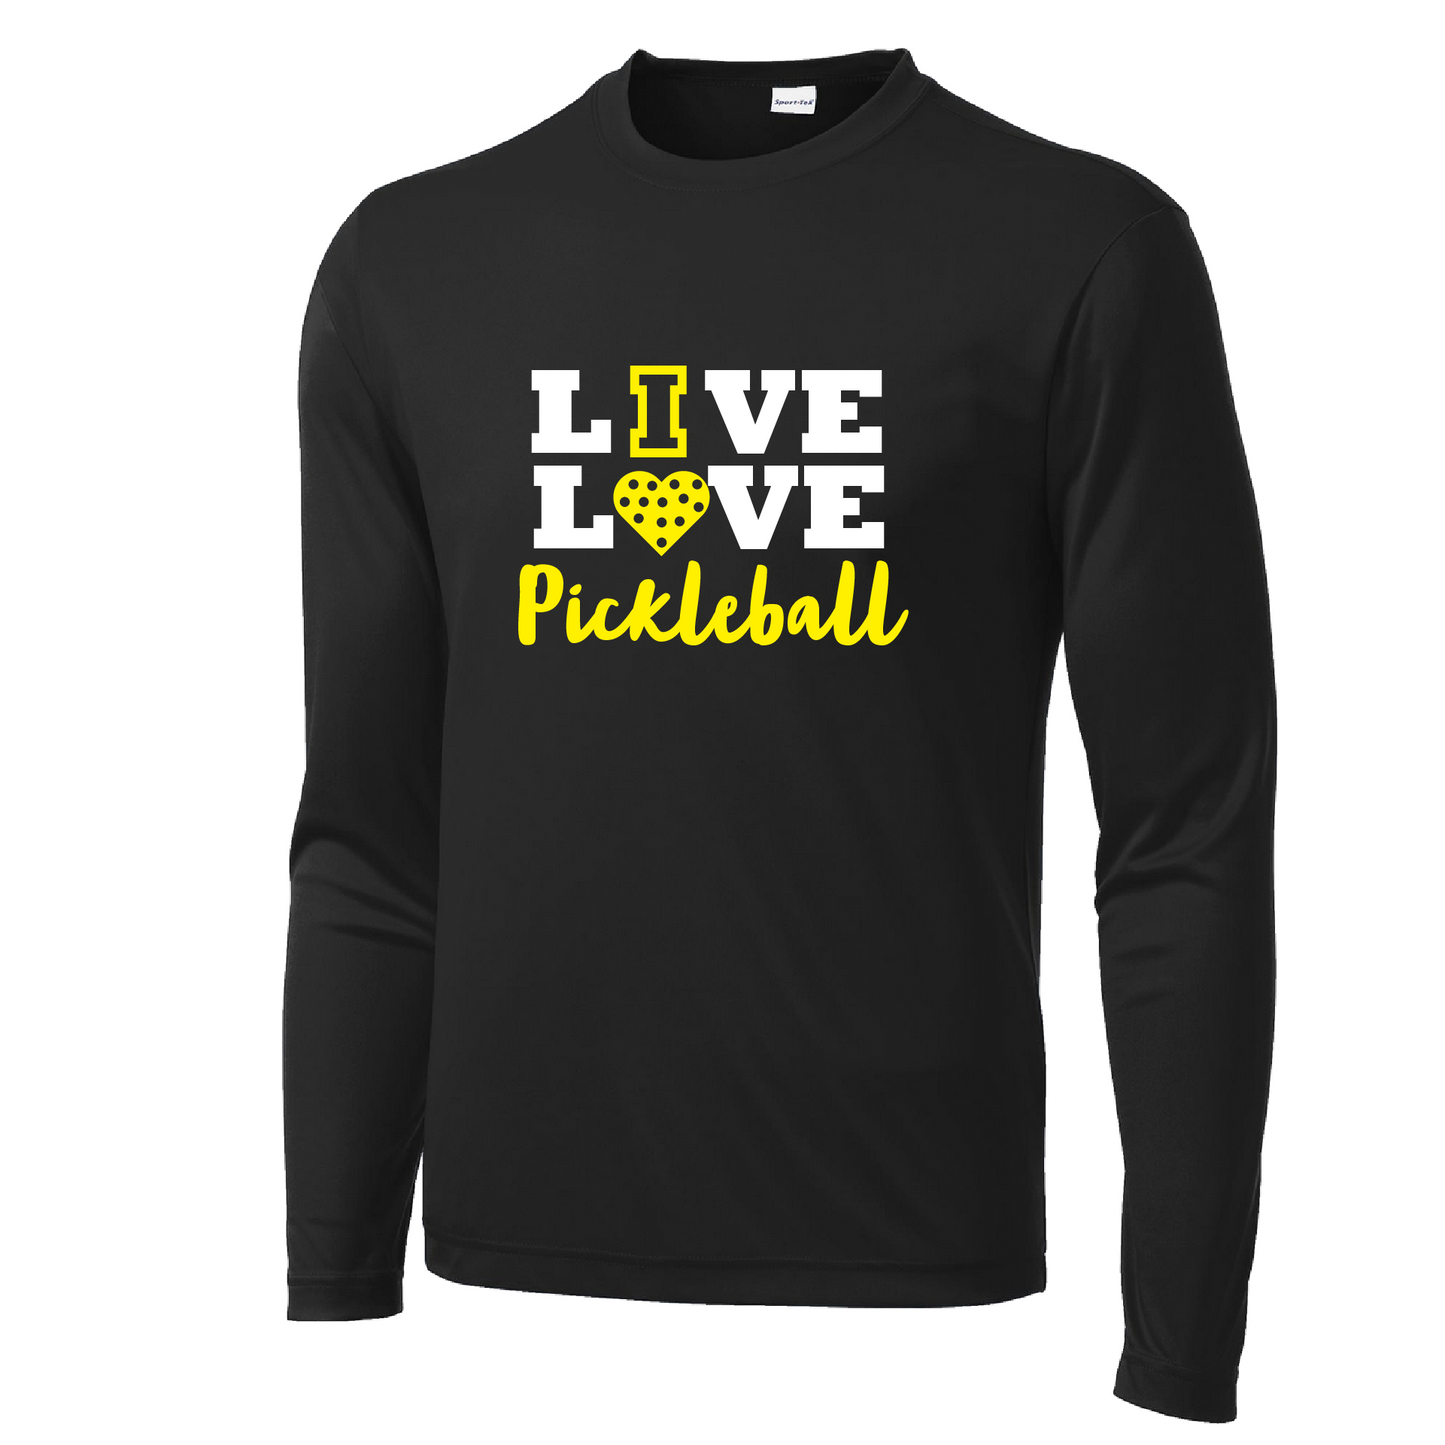 Pickleball Design: Live Love Pickleball  Men's Style: Long Sleeve  Shirts are lightweight, roomy and highly breathable. These moisture-wicking shirts are designed for athletic performance. They feature PosiCharge technology to lock in color and prevent logos from fading. Removable tag and set-in sleeves for comfort.